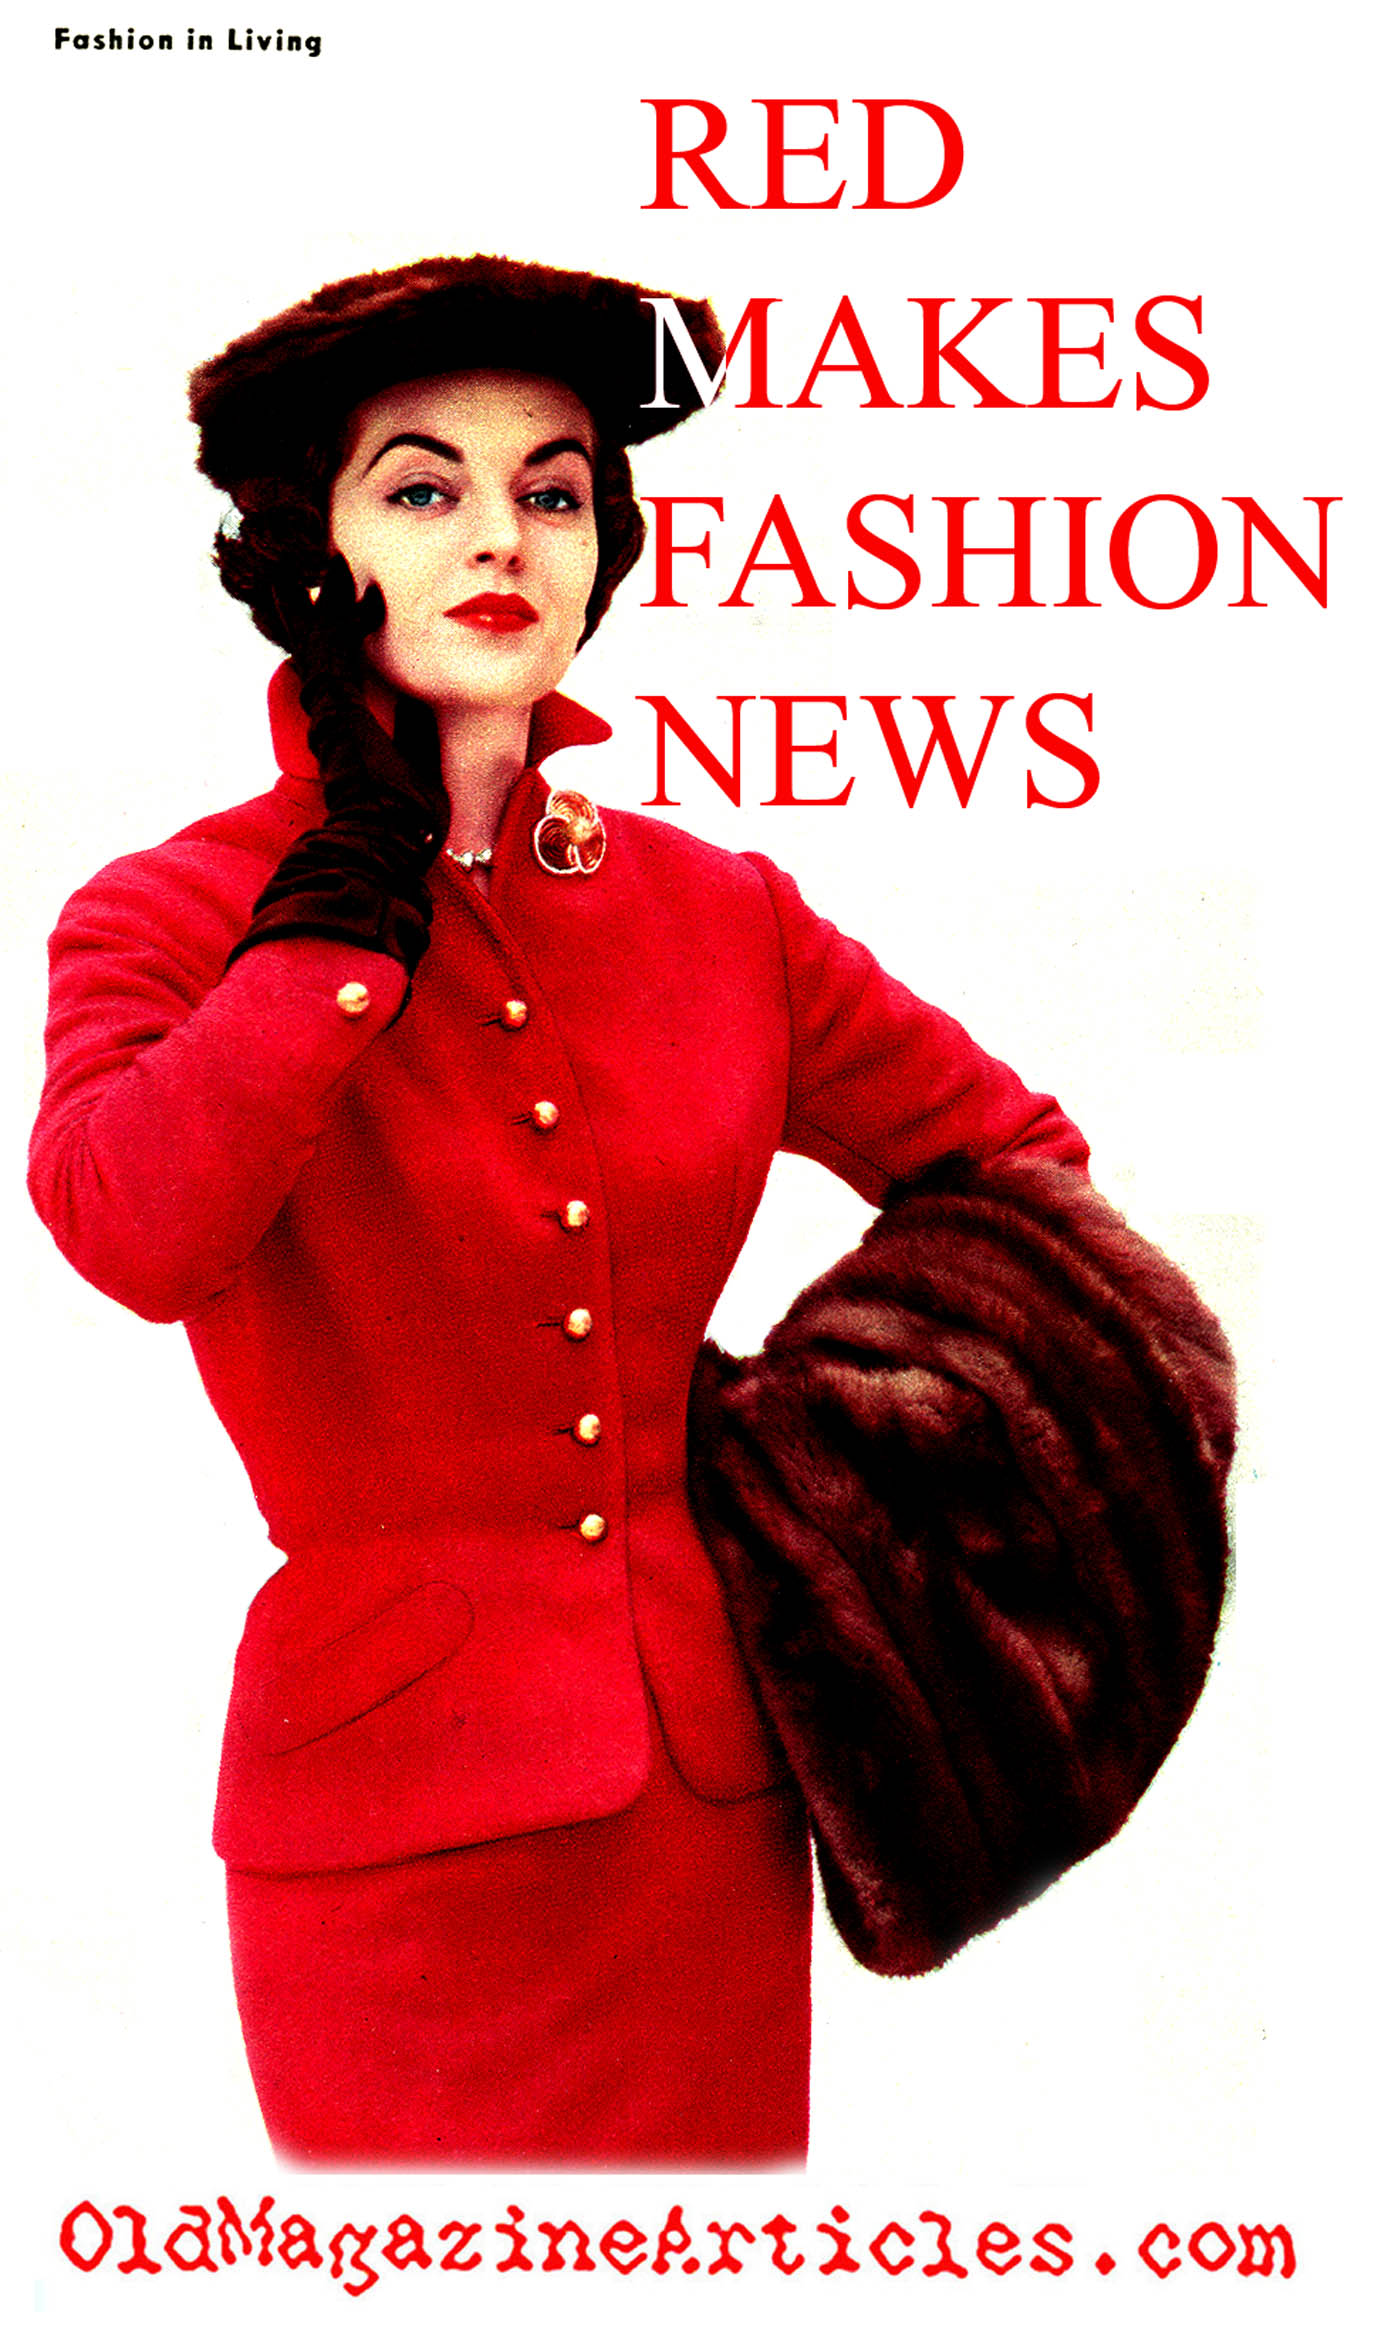 liefdadigheid Legende nul 1950S FASHION COLOURS,COLORS IN 50S FASHION,RED IN FIFTIES FASHION,RED 1950S  DRESS,RED 1950S DRESSES,1950S RED,1950S PRIMARY COLOR,FASHIONABLE COLORS IN  1950S CLOTHES,ROUGE MODE 1950, - Magazine Article - Old Magazine Articles